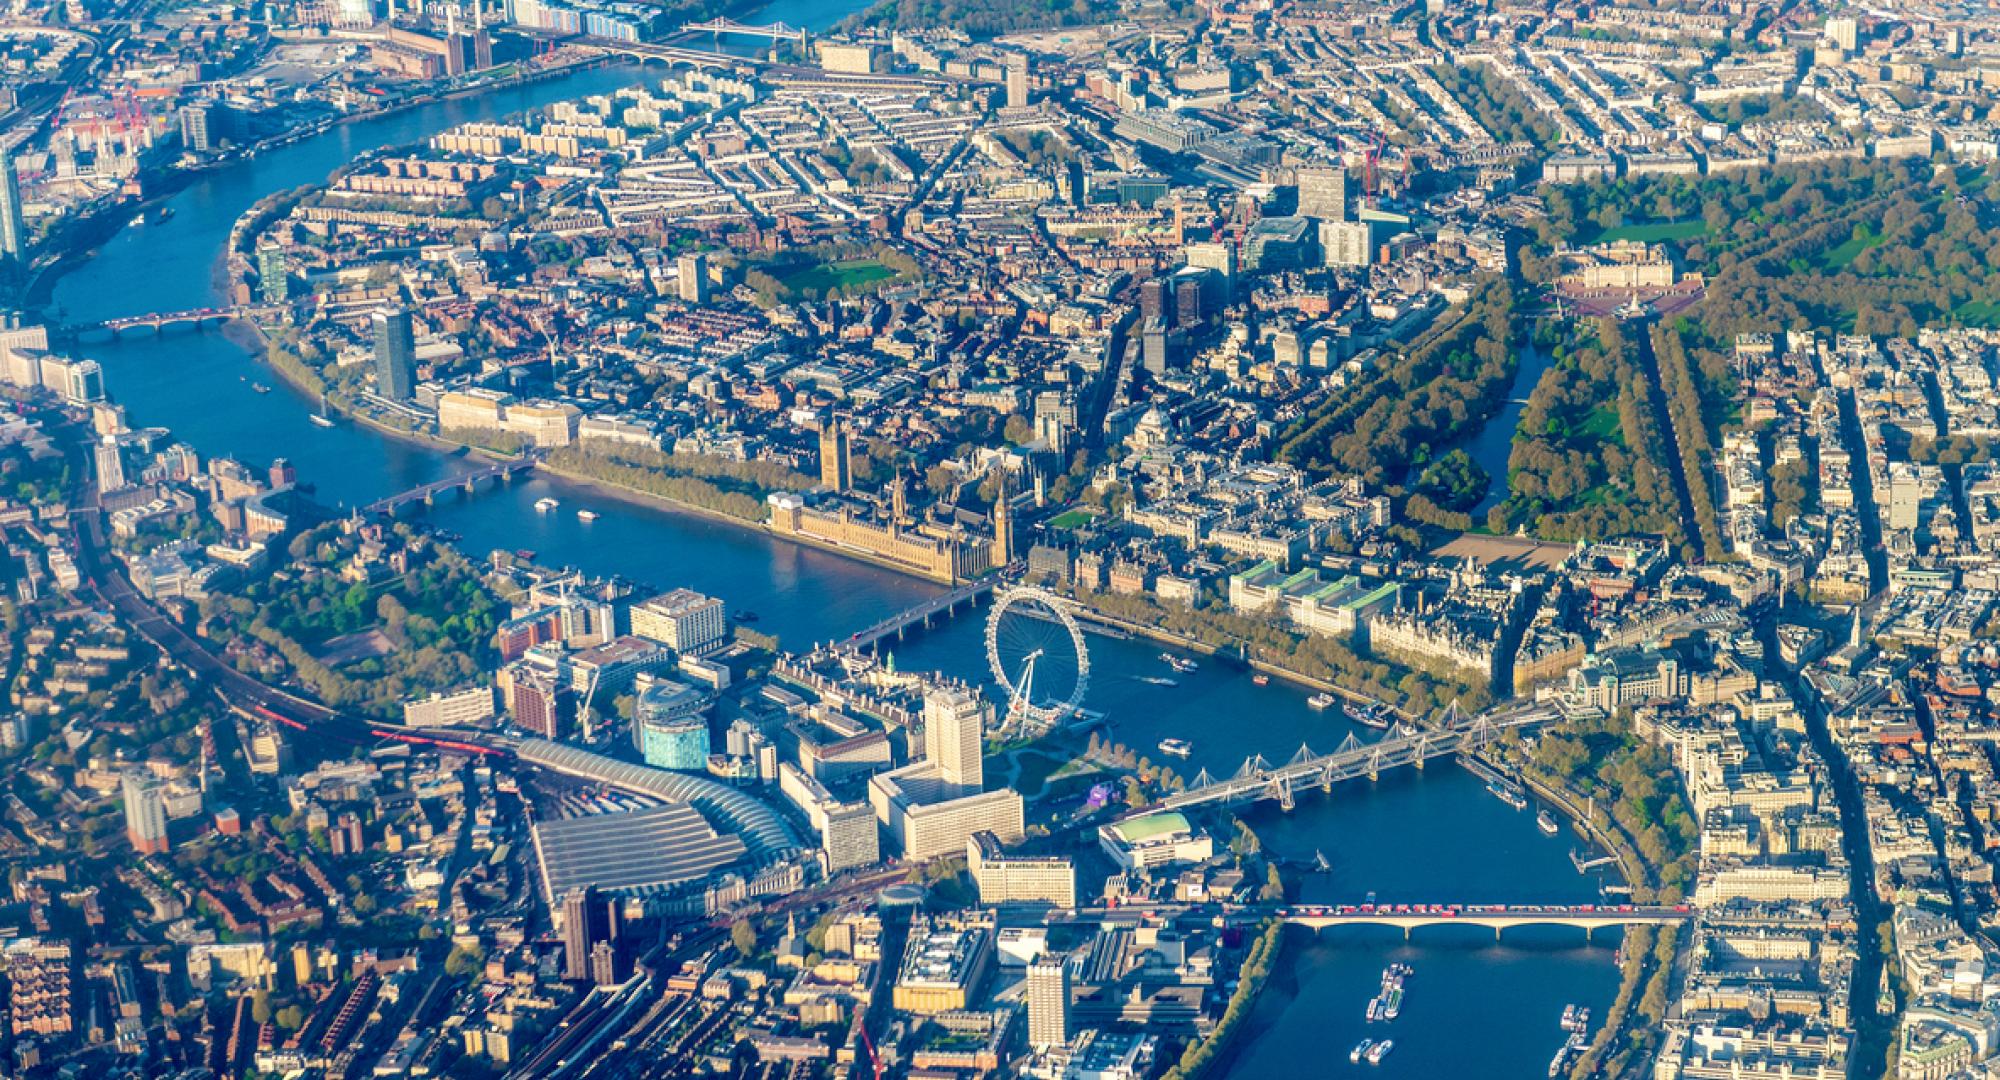 Aerial view of Westminster, London